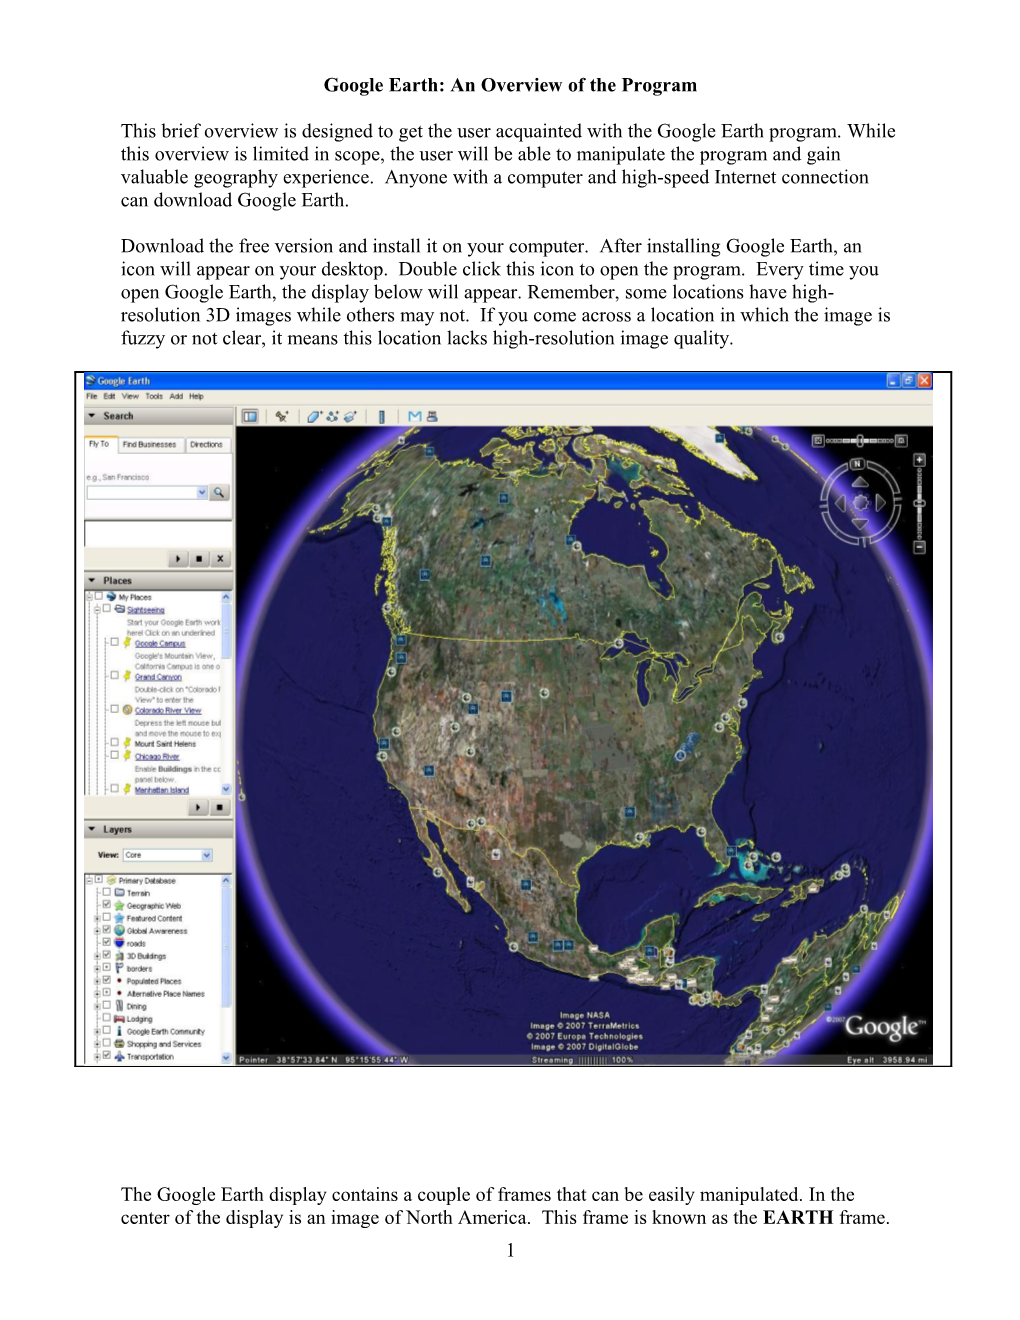 Google Earth: a Quick Overview